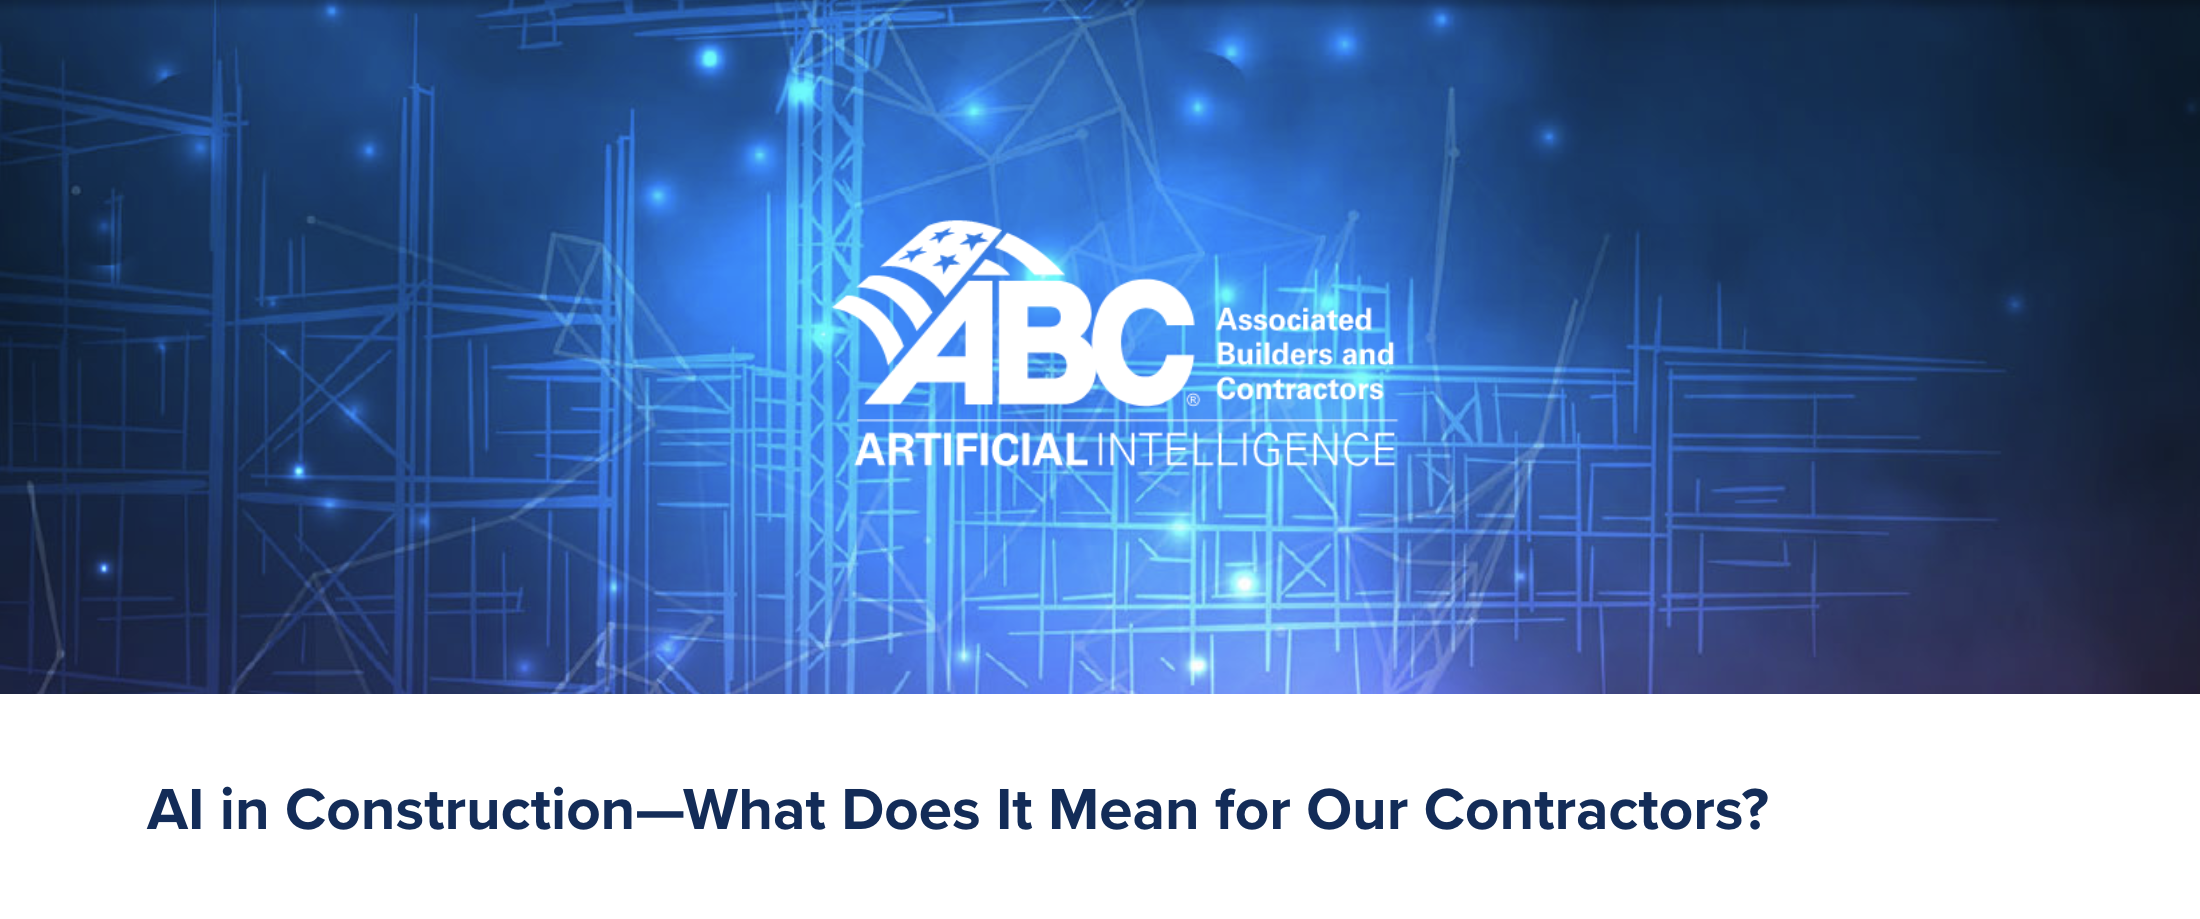 ABC releases technology guide for AI in construction 